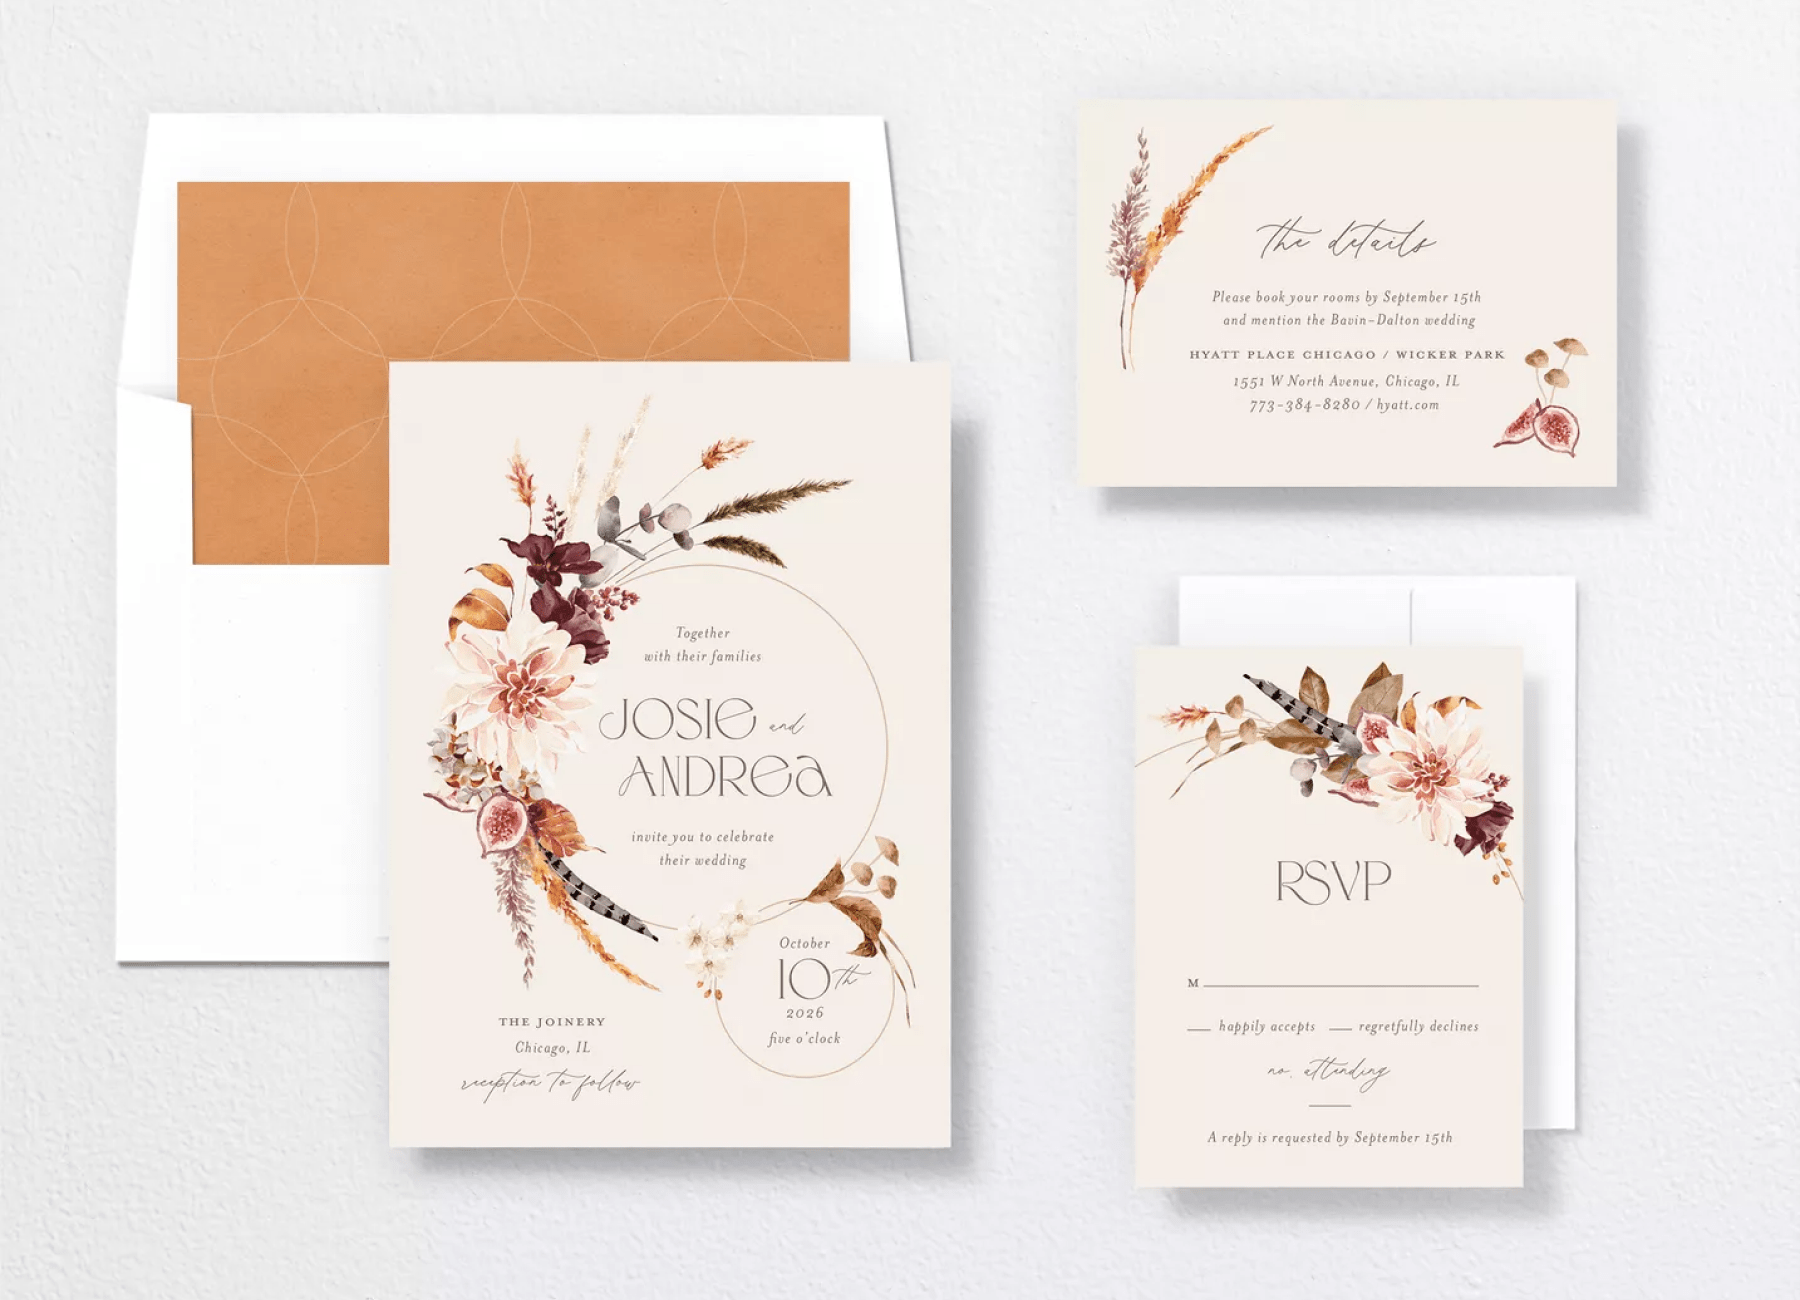 A wedding invitation with a hoop and delicate flower arrangement motif beside a matching details insert and RSVP card.